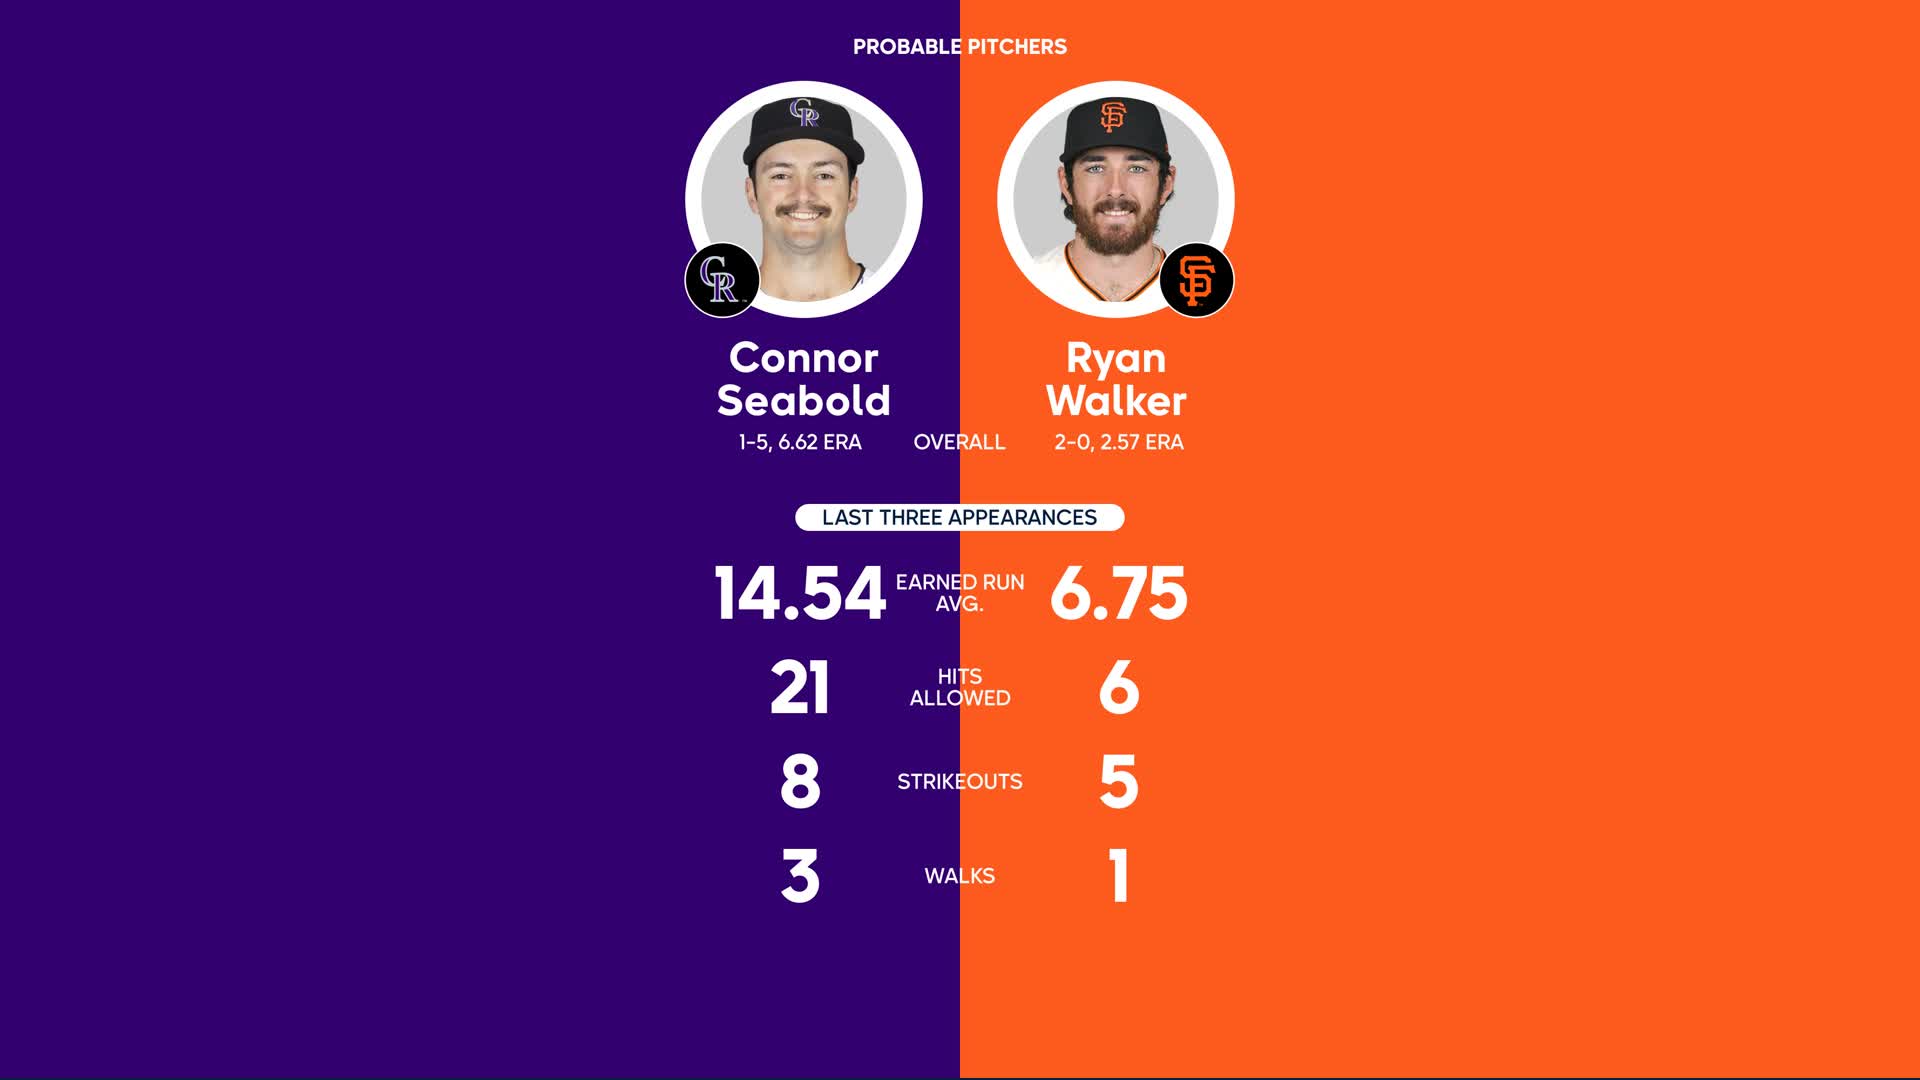 Giants-Rockies Series Preview: The Rockies have been real bad on the road,  but they're probably due for a surprise - McCovey Chronicles